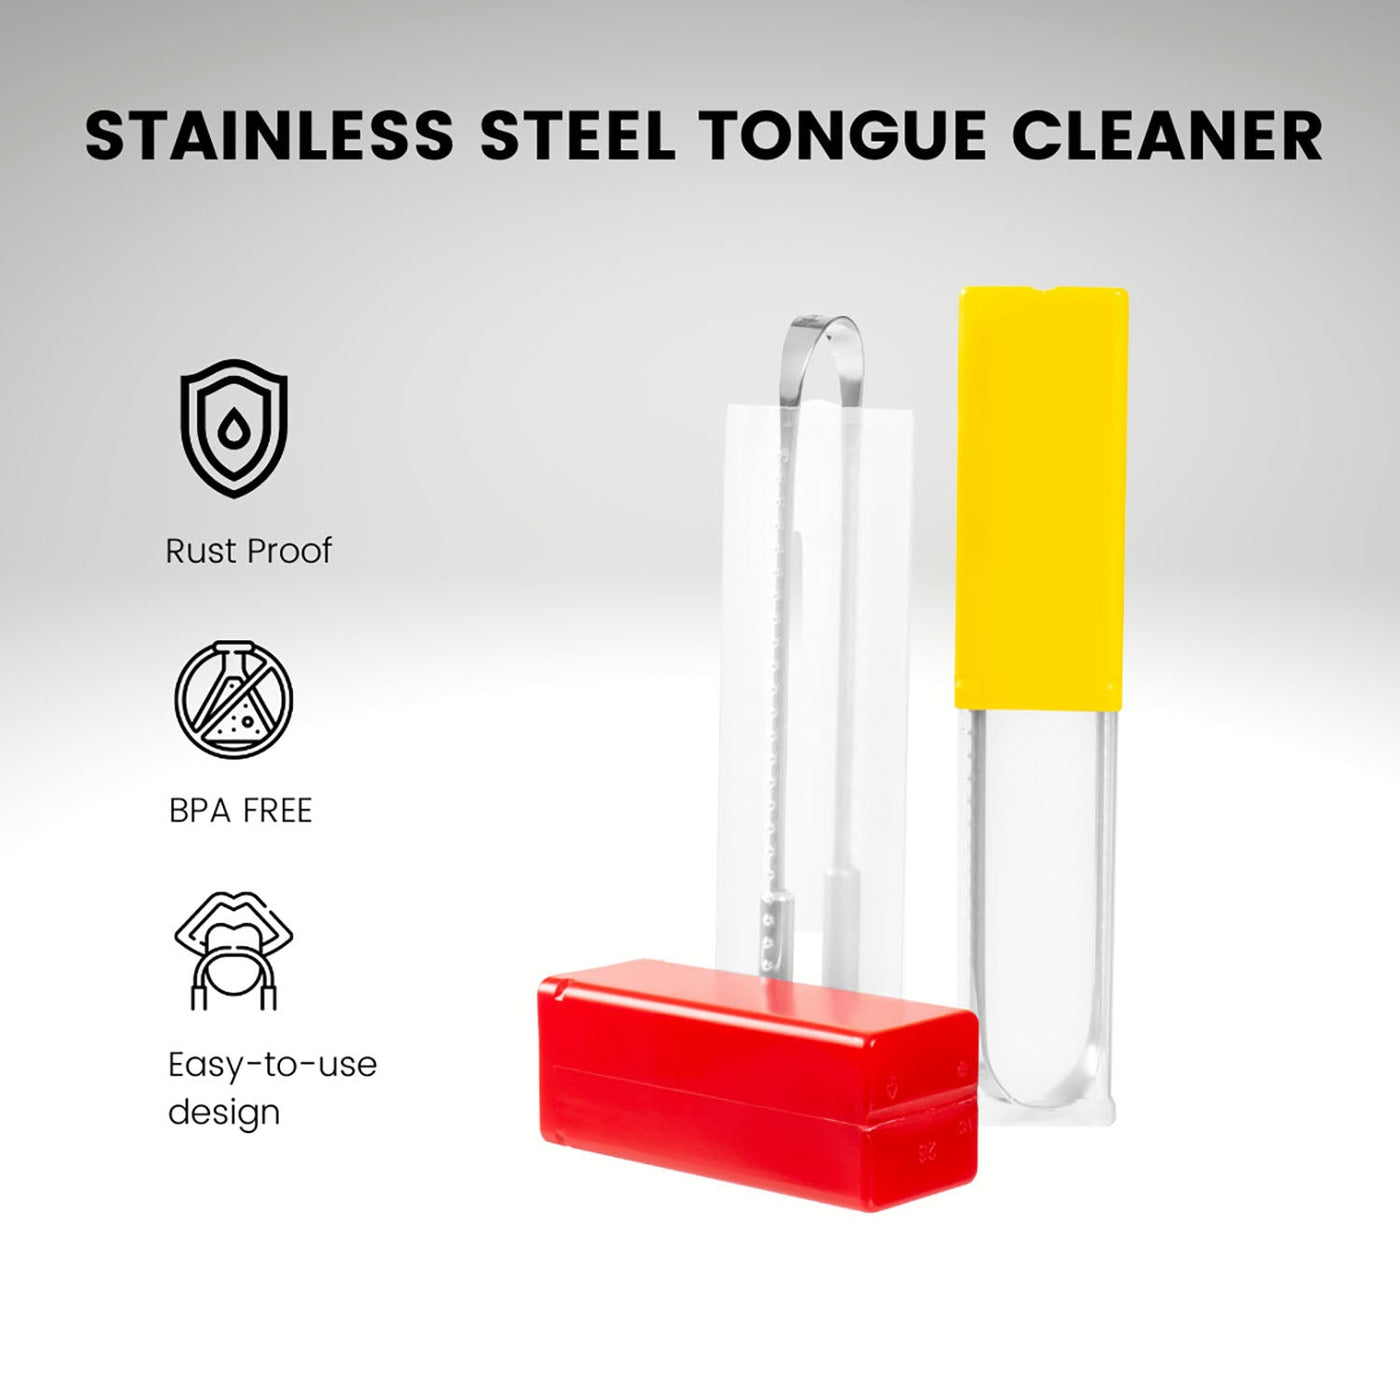 Stainless Steel Tongue Cleaner - PinkWoolf